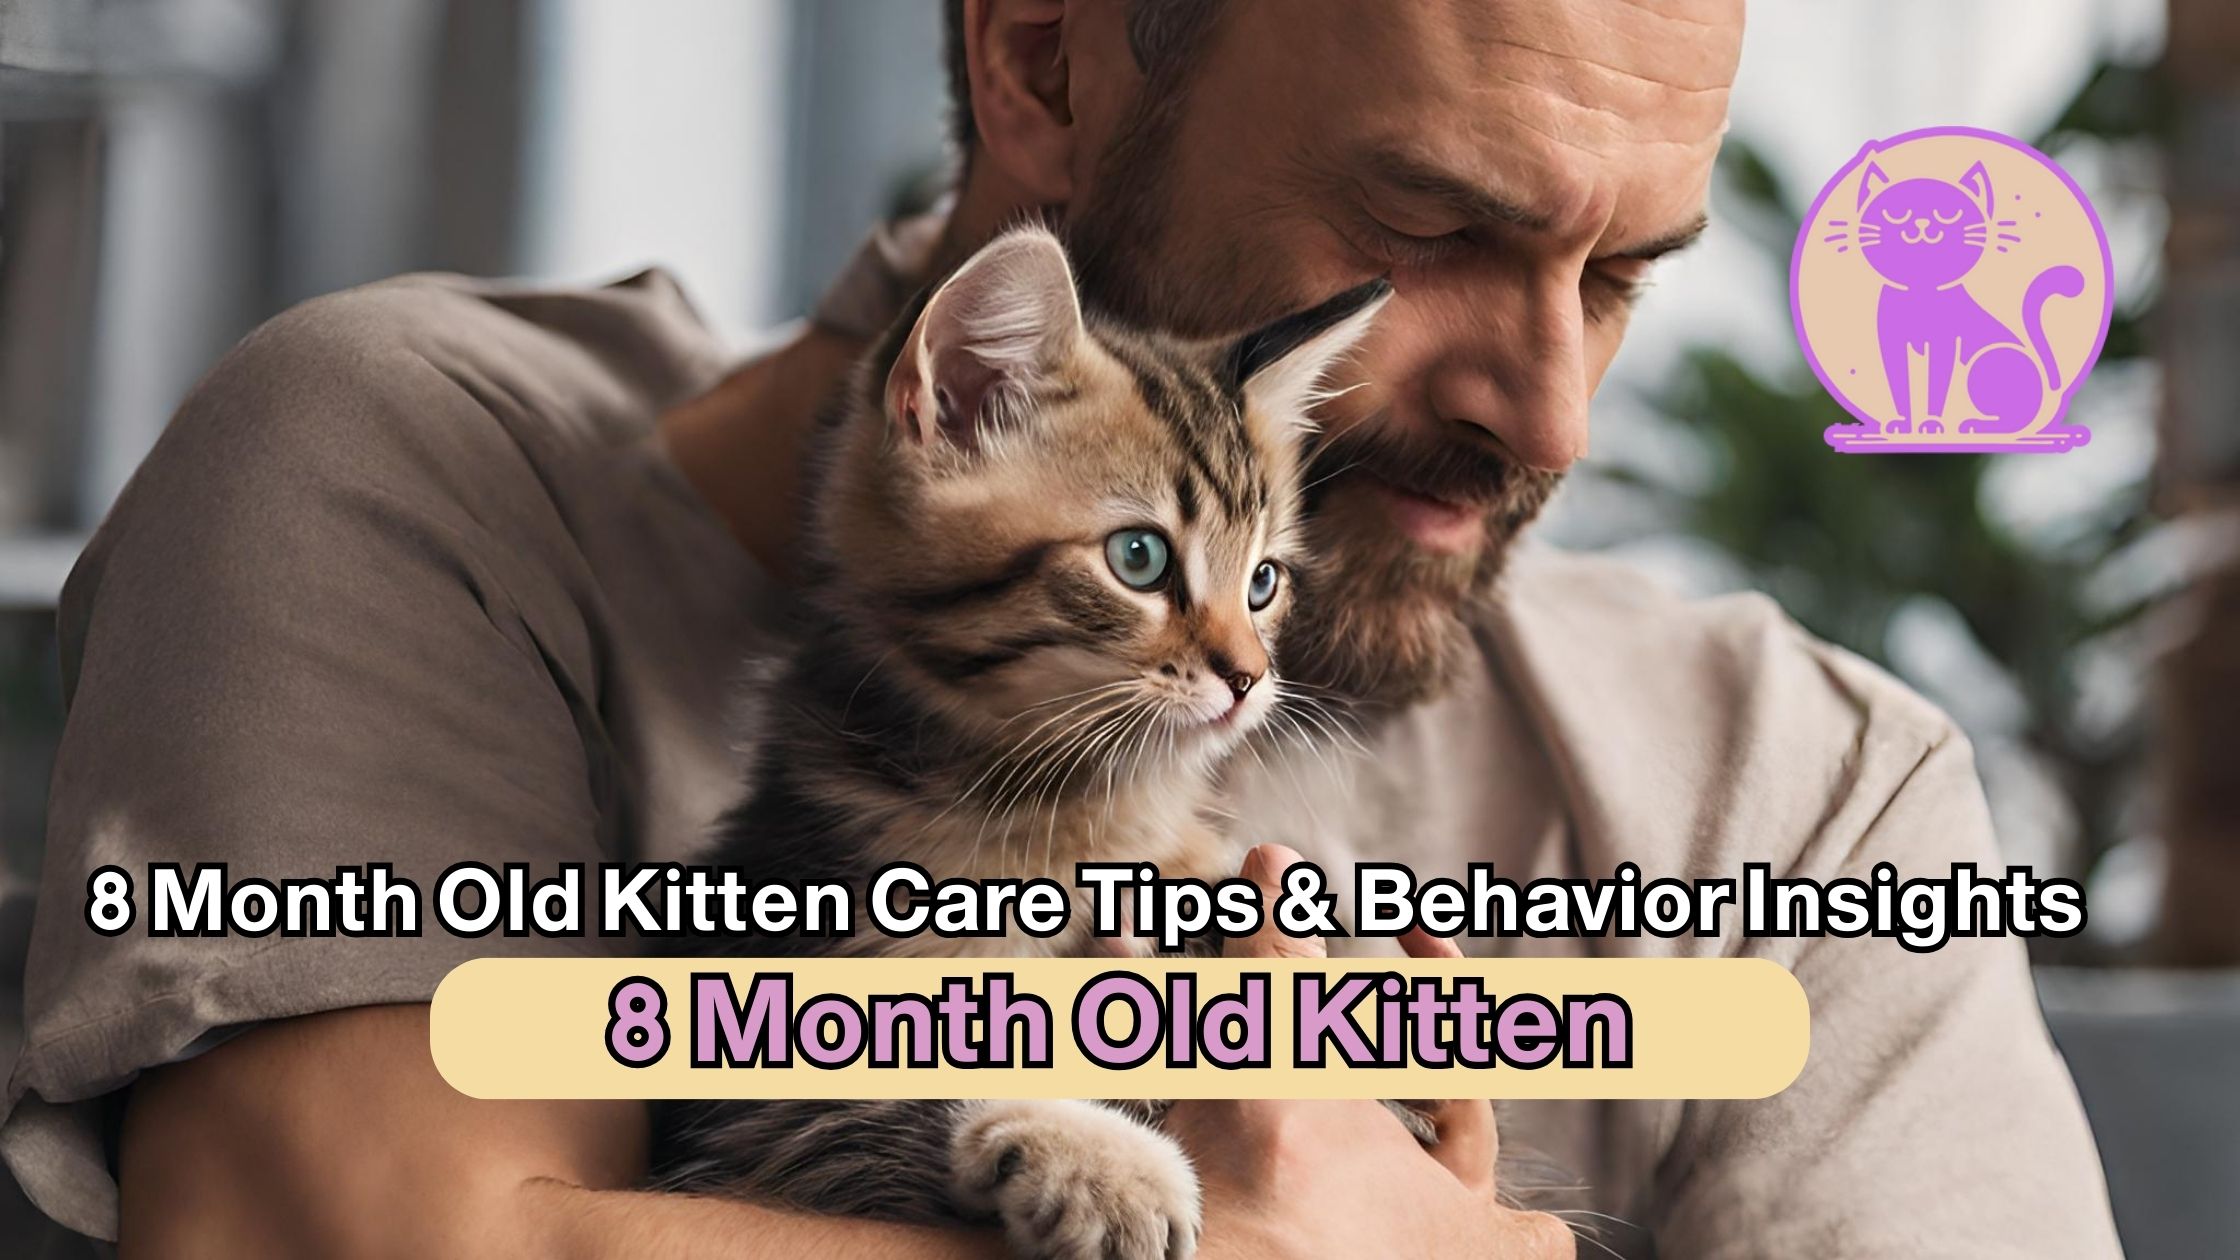 8 Month Old Kitten Care Tips